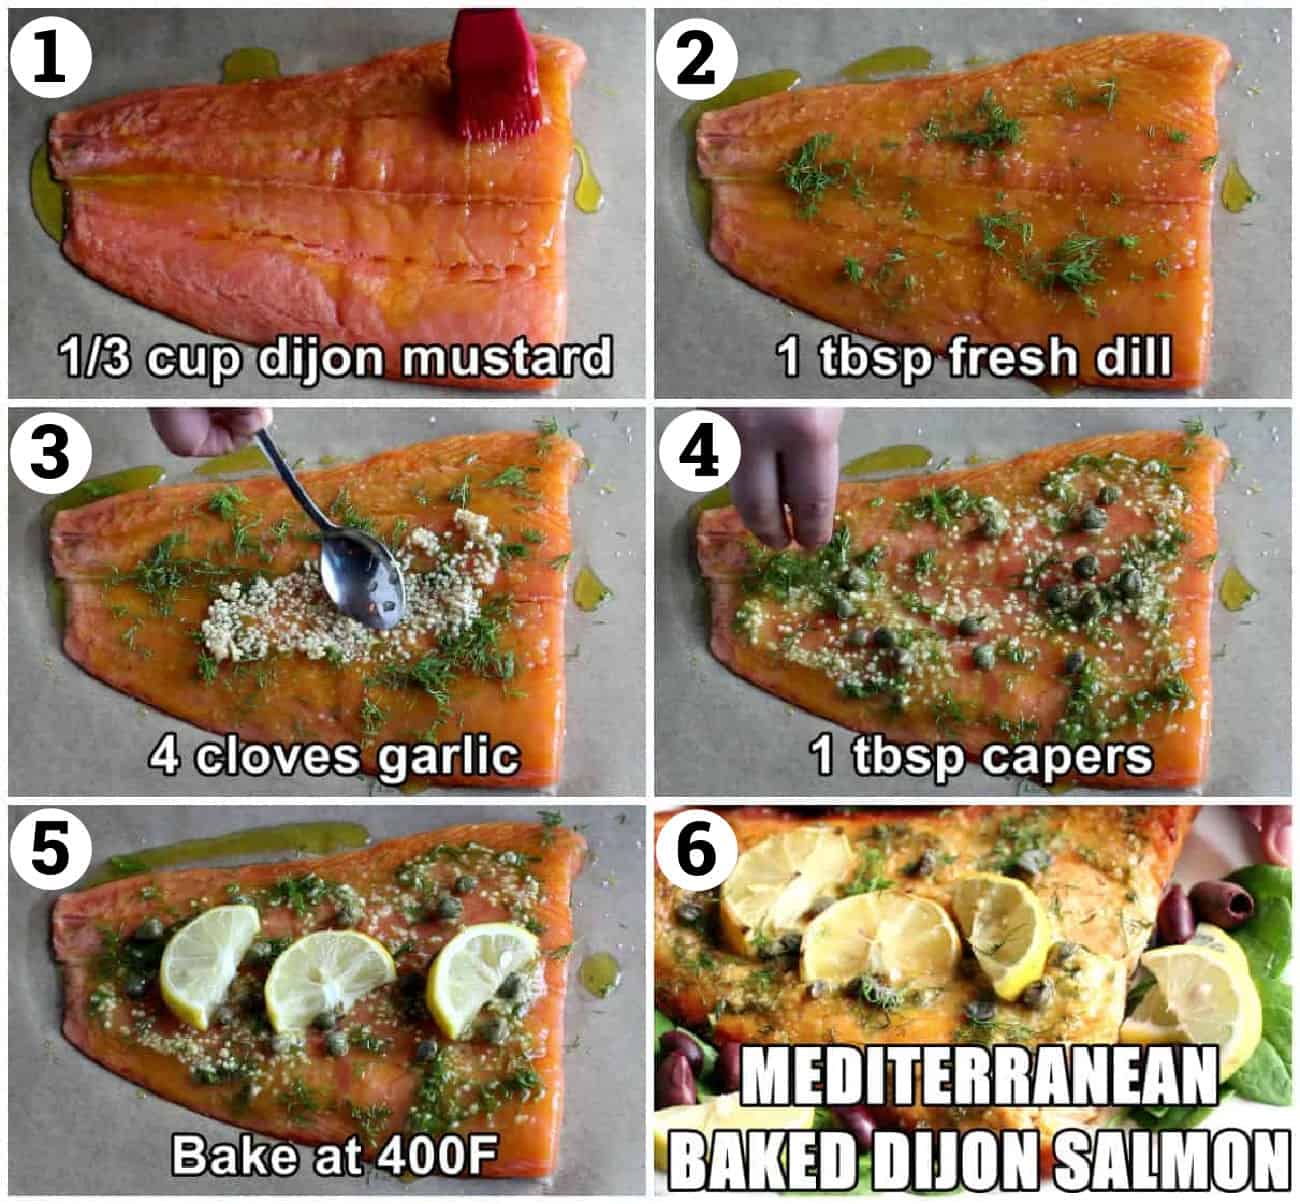 Steps to make baked dijon salmon. Spread mustard, add dill, garlic, capers and lemon. Bake in the oven and serve. 